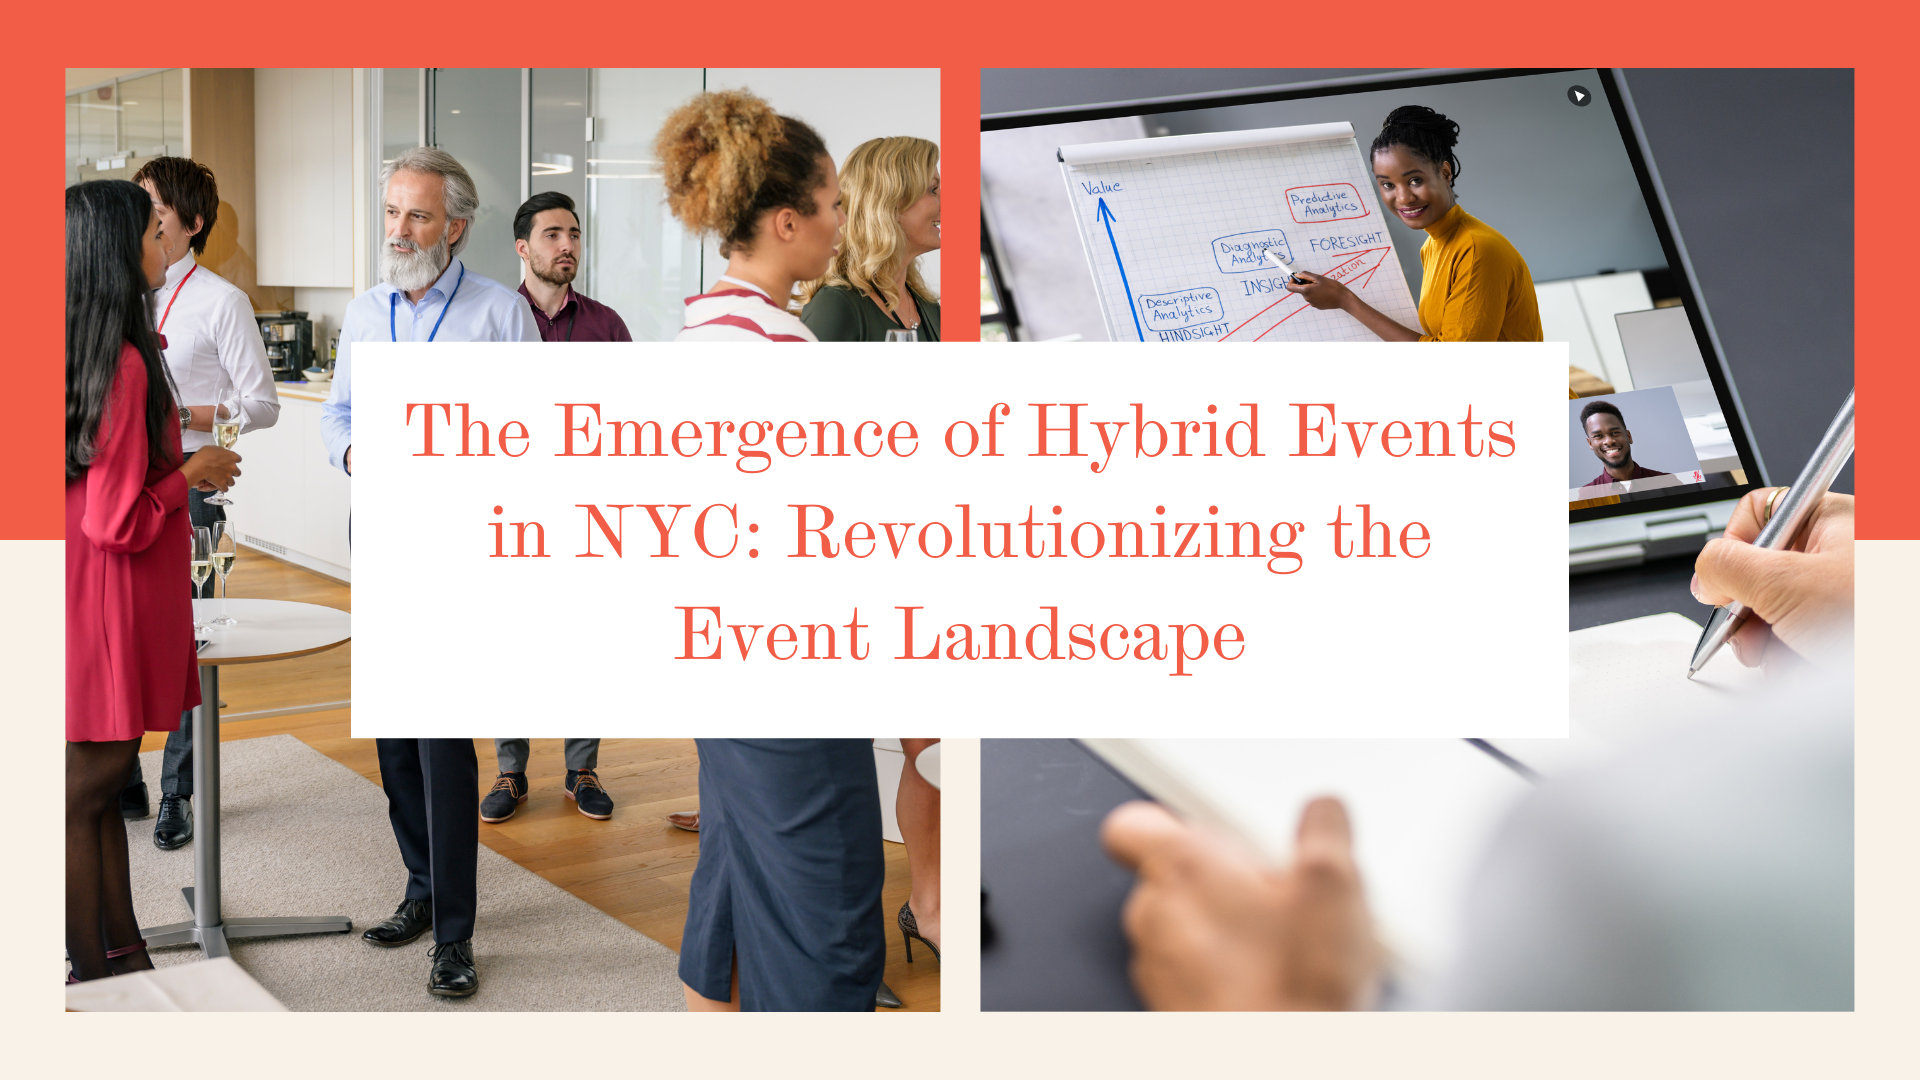 The emergence of hybrid events in NYC